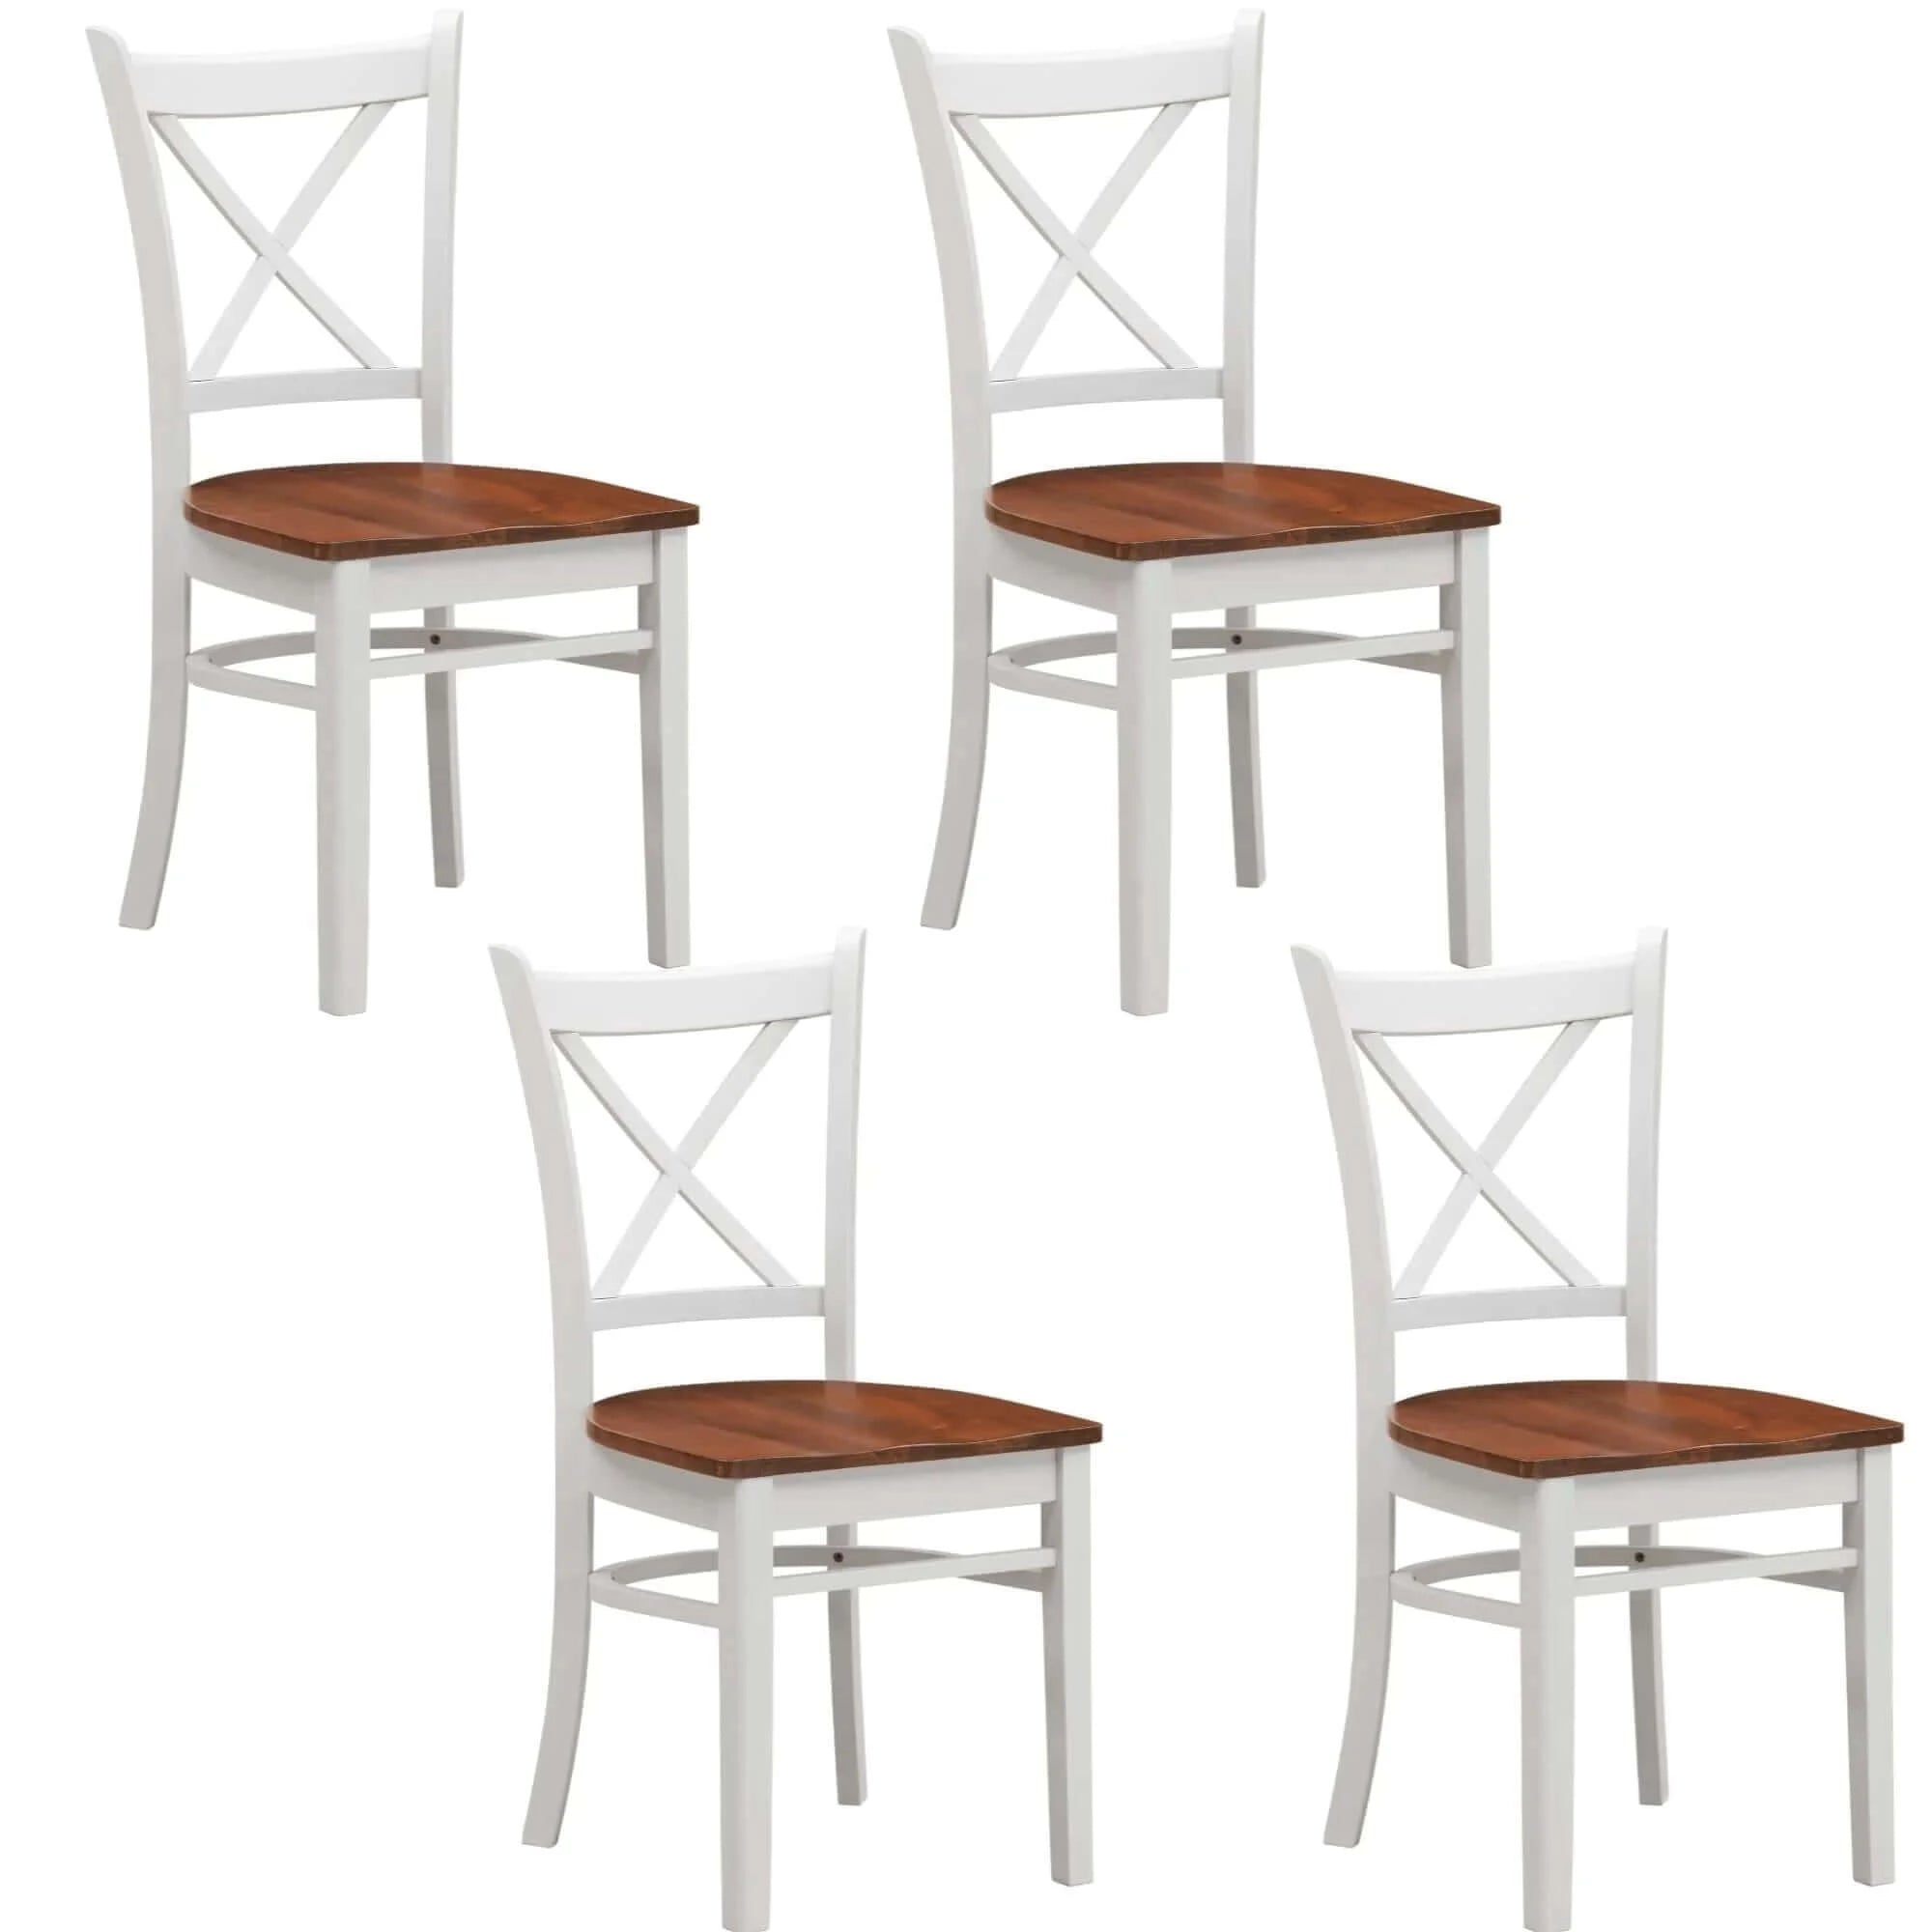 Buy lupin dining chair set of 4 crossback solid rubber wood furniture - white oak - upinteriors-Upinteriors